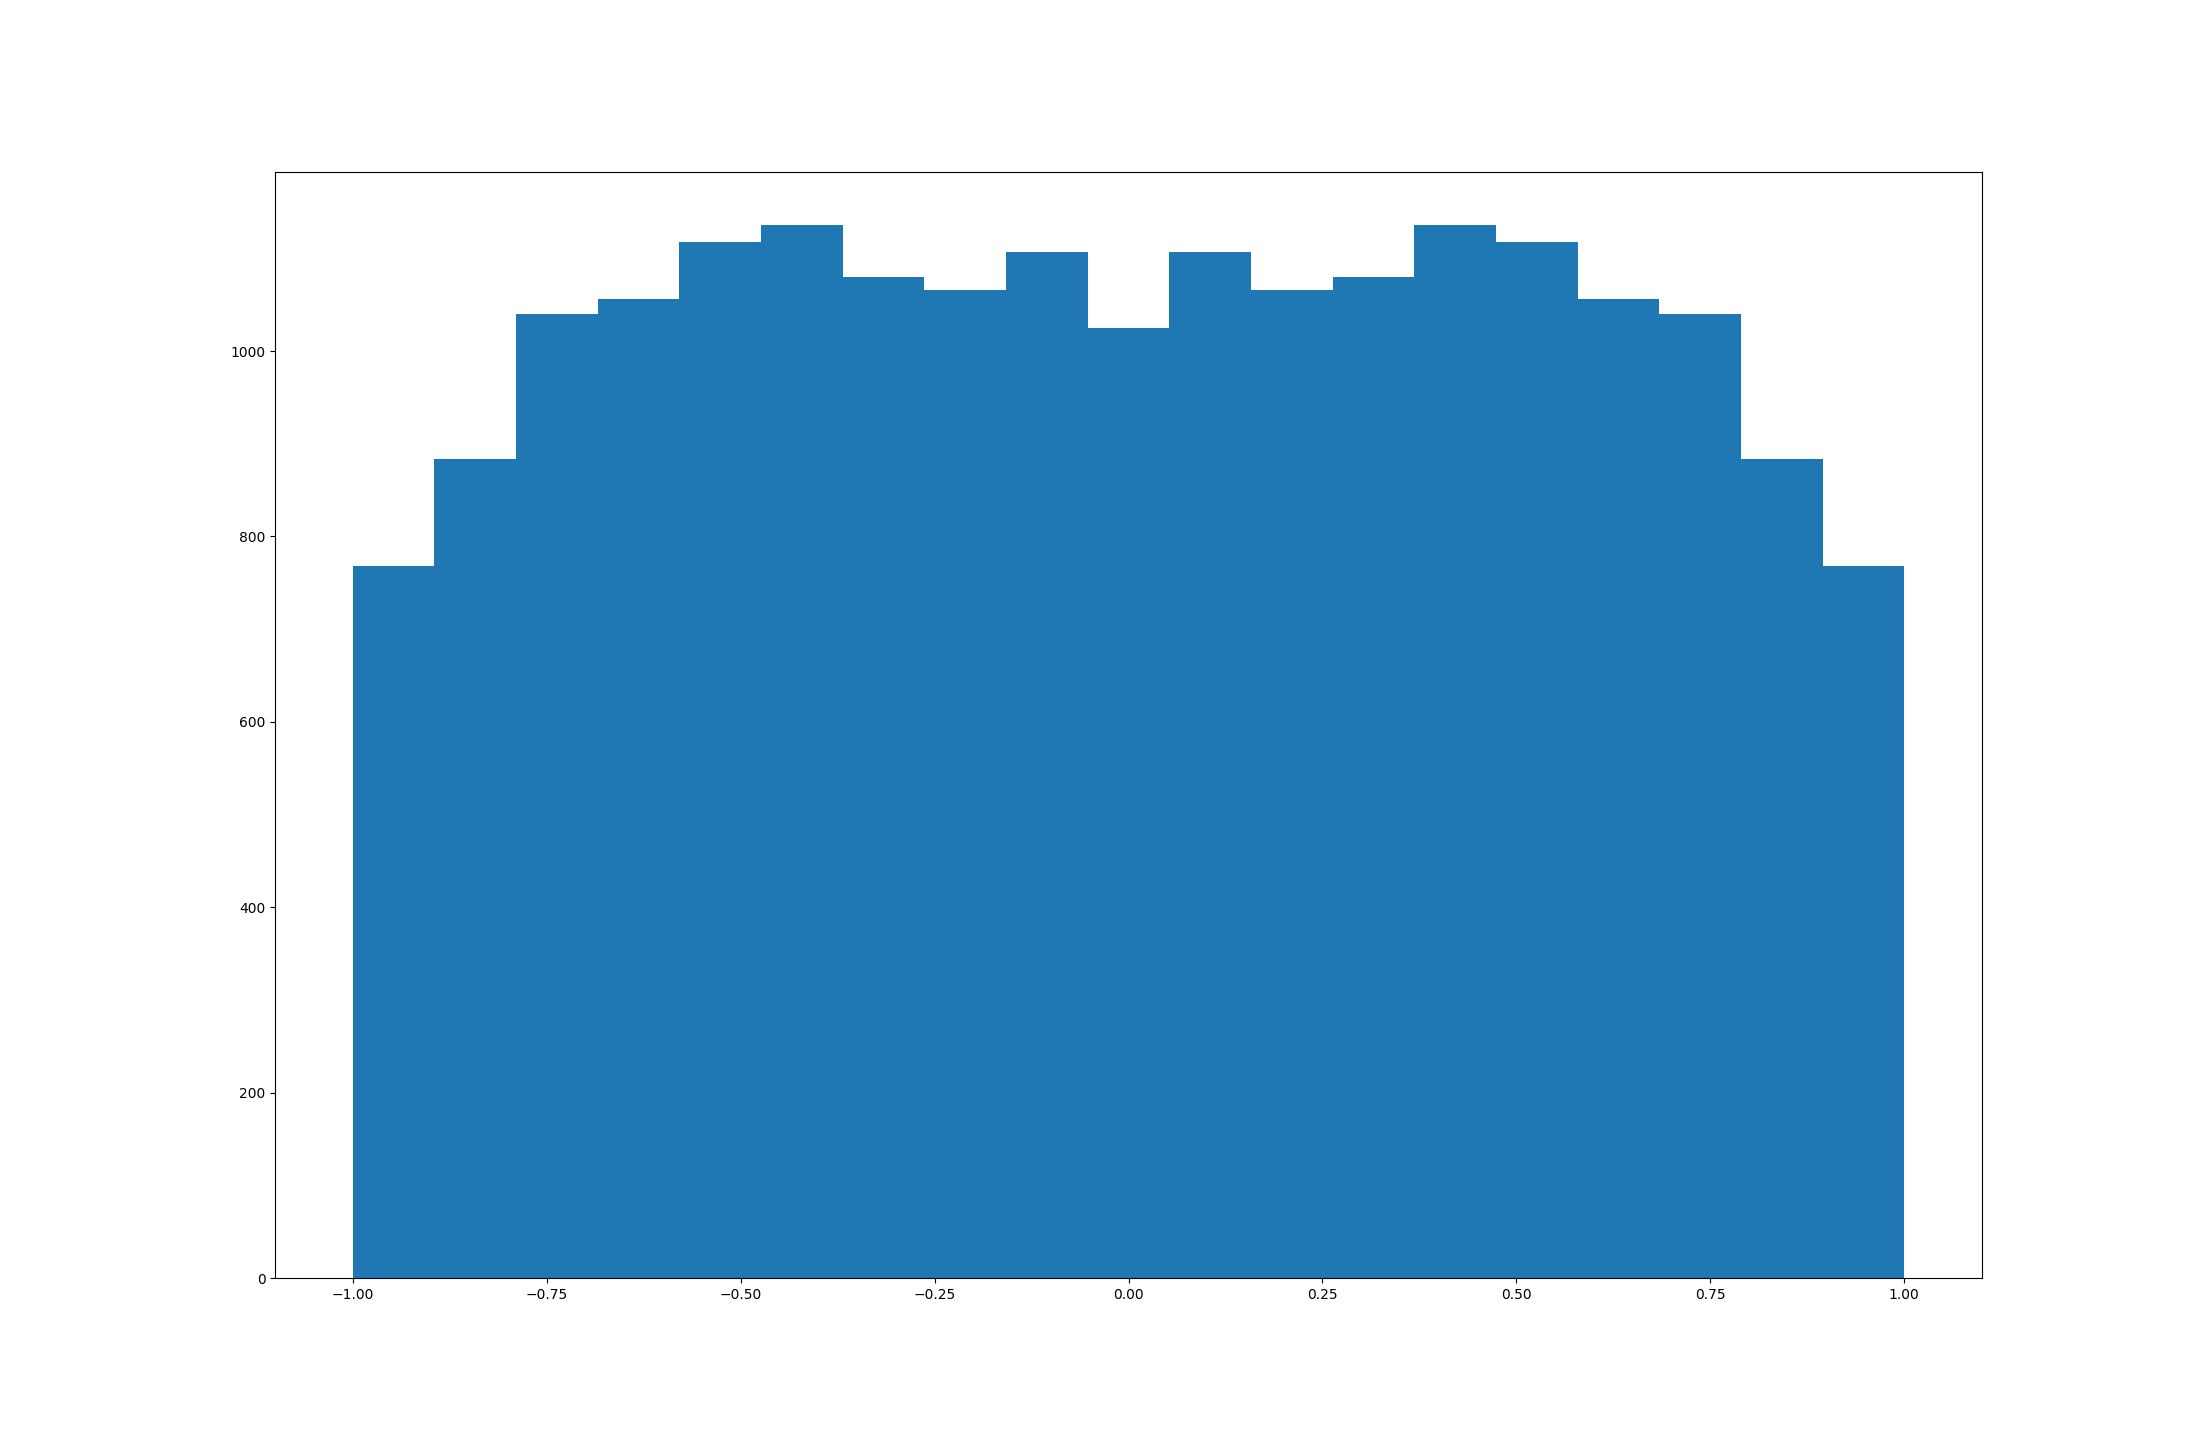 Final respampled distribution viewed with a 20 bin histogram